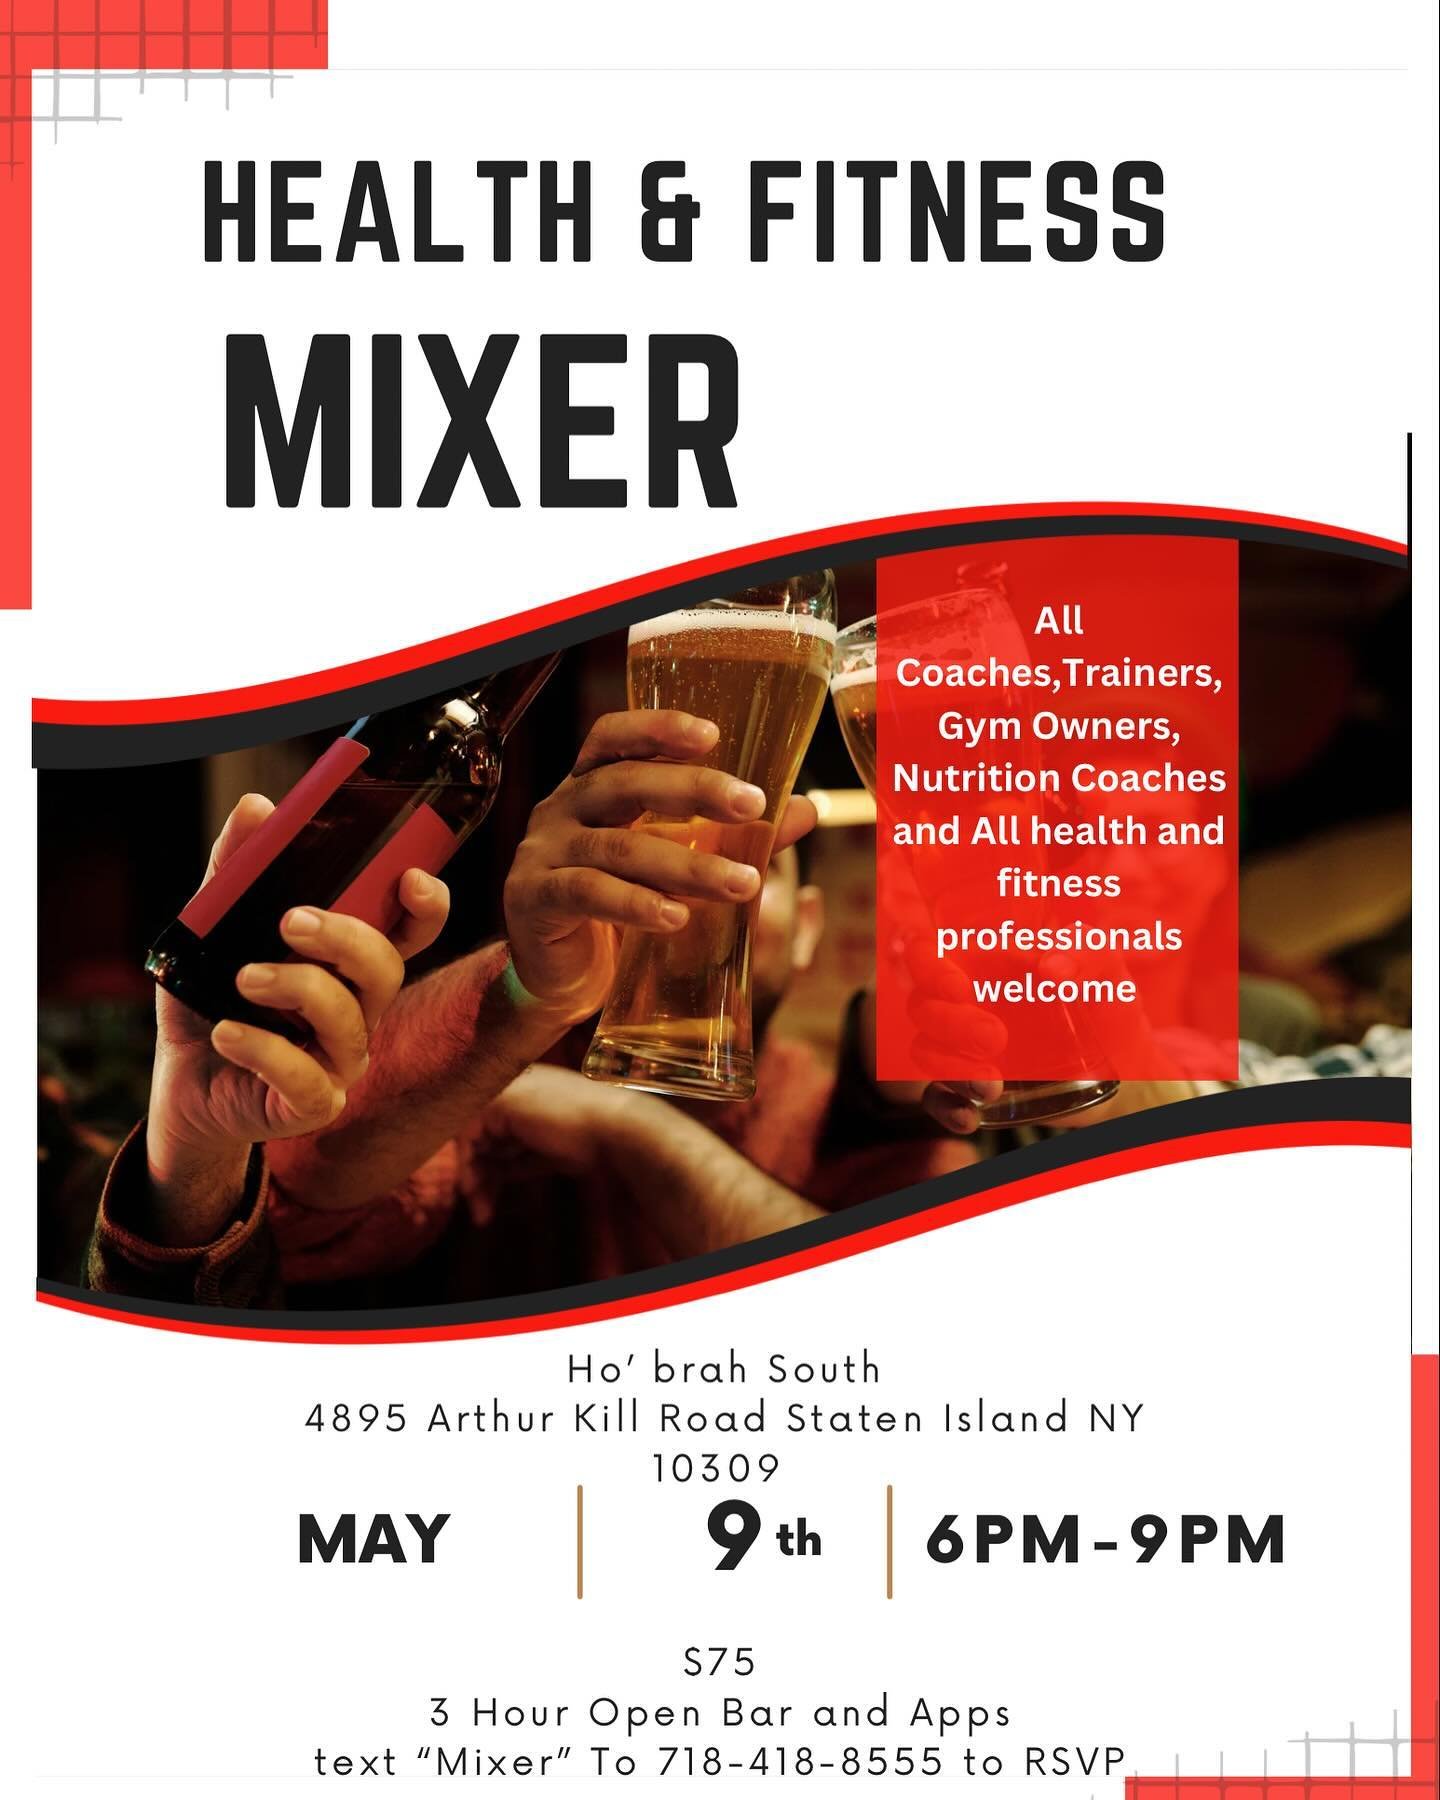 MIXER ALERT 🚨🤝 THIS THURSDAY, MAY 9TH‼️
Text #Mixer to 718 419 8555 today to #RSVP ✔️
.
.
.
#networkingevent #network #community #health #wellness #trainers #gymowners #boxinglife #boxingcommunity #fitnessindustry #fitnessexpo #wellnessjourney #sta